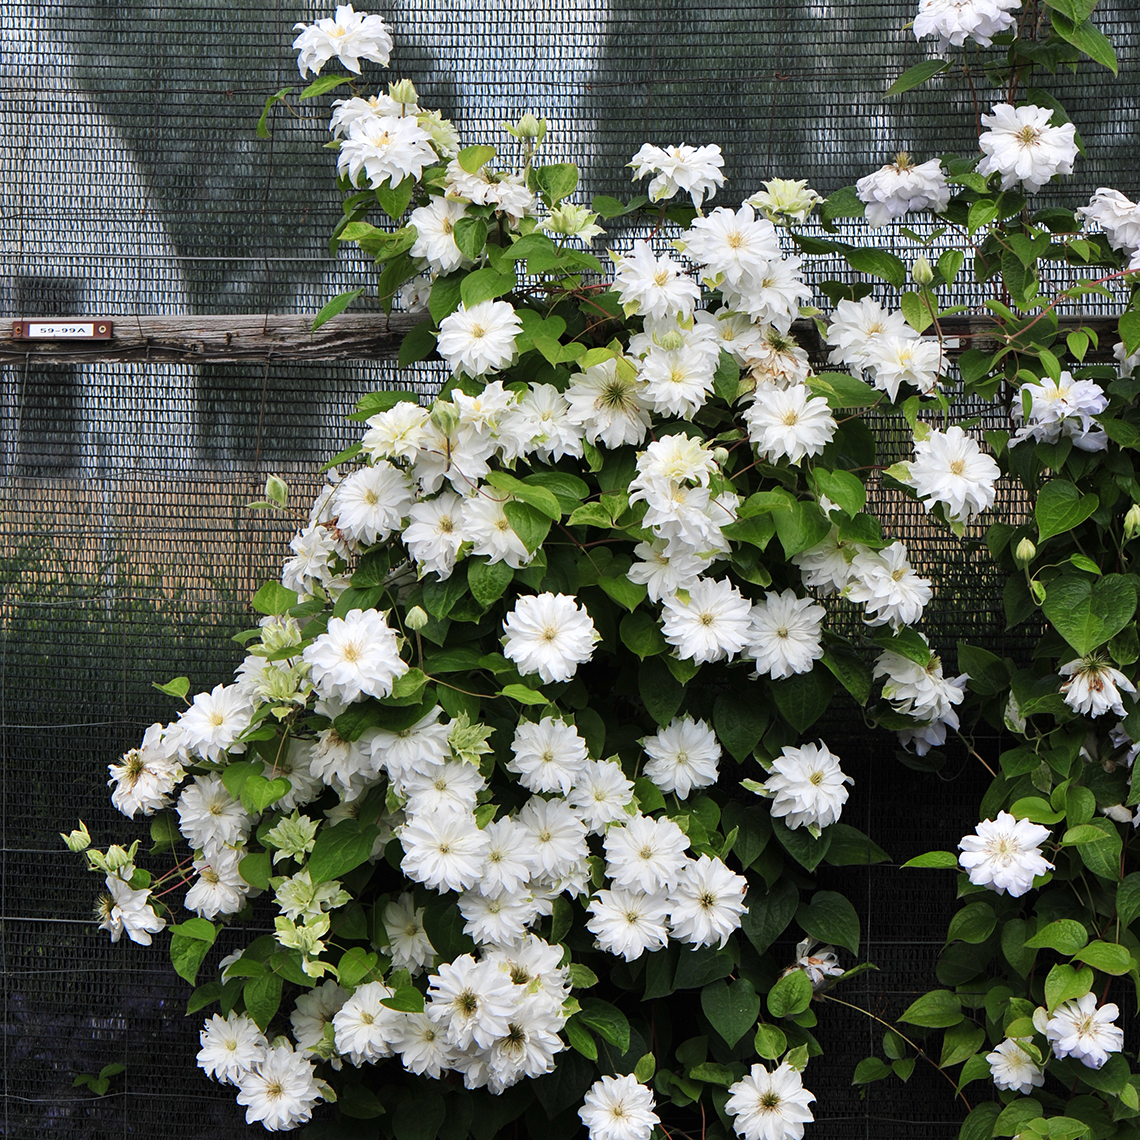 Heavy blooming Madame Maria Clematis on support